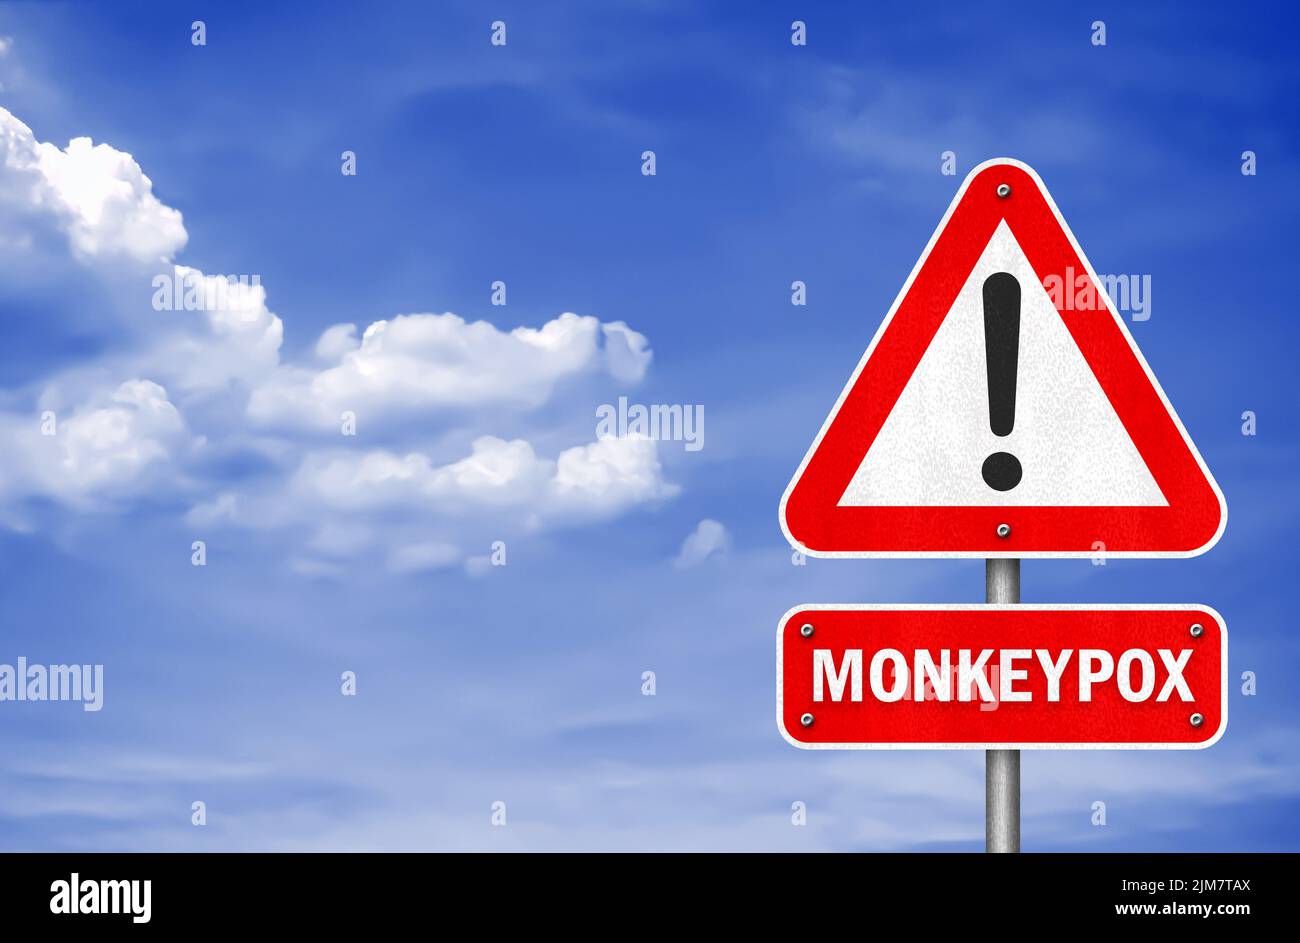 Monkeypox - road sign information message Stock Photo